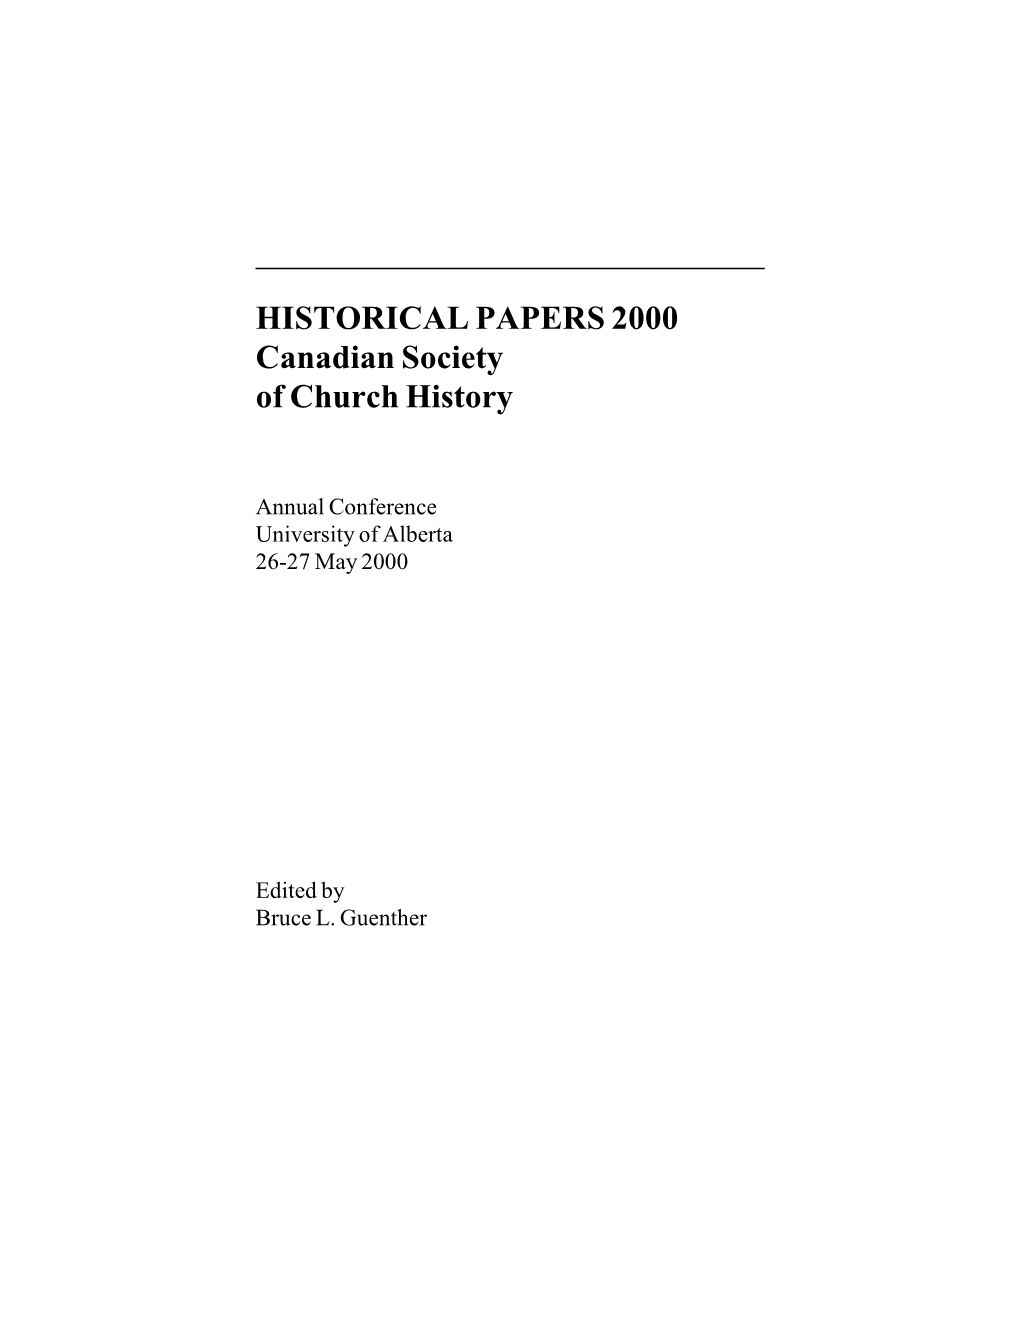 HISTORICAL PAPERS 2000 Canadian Society of Church History